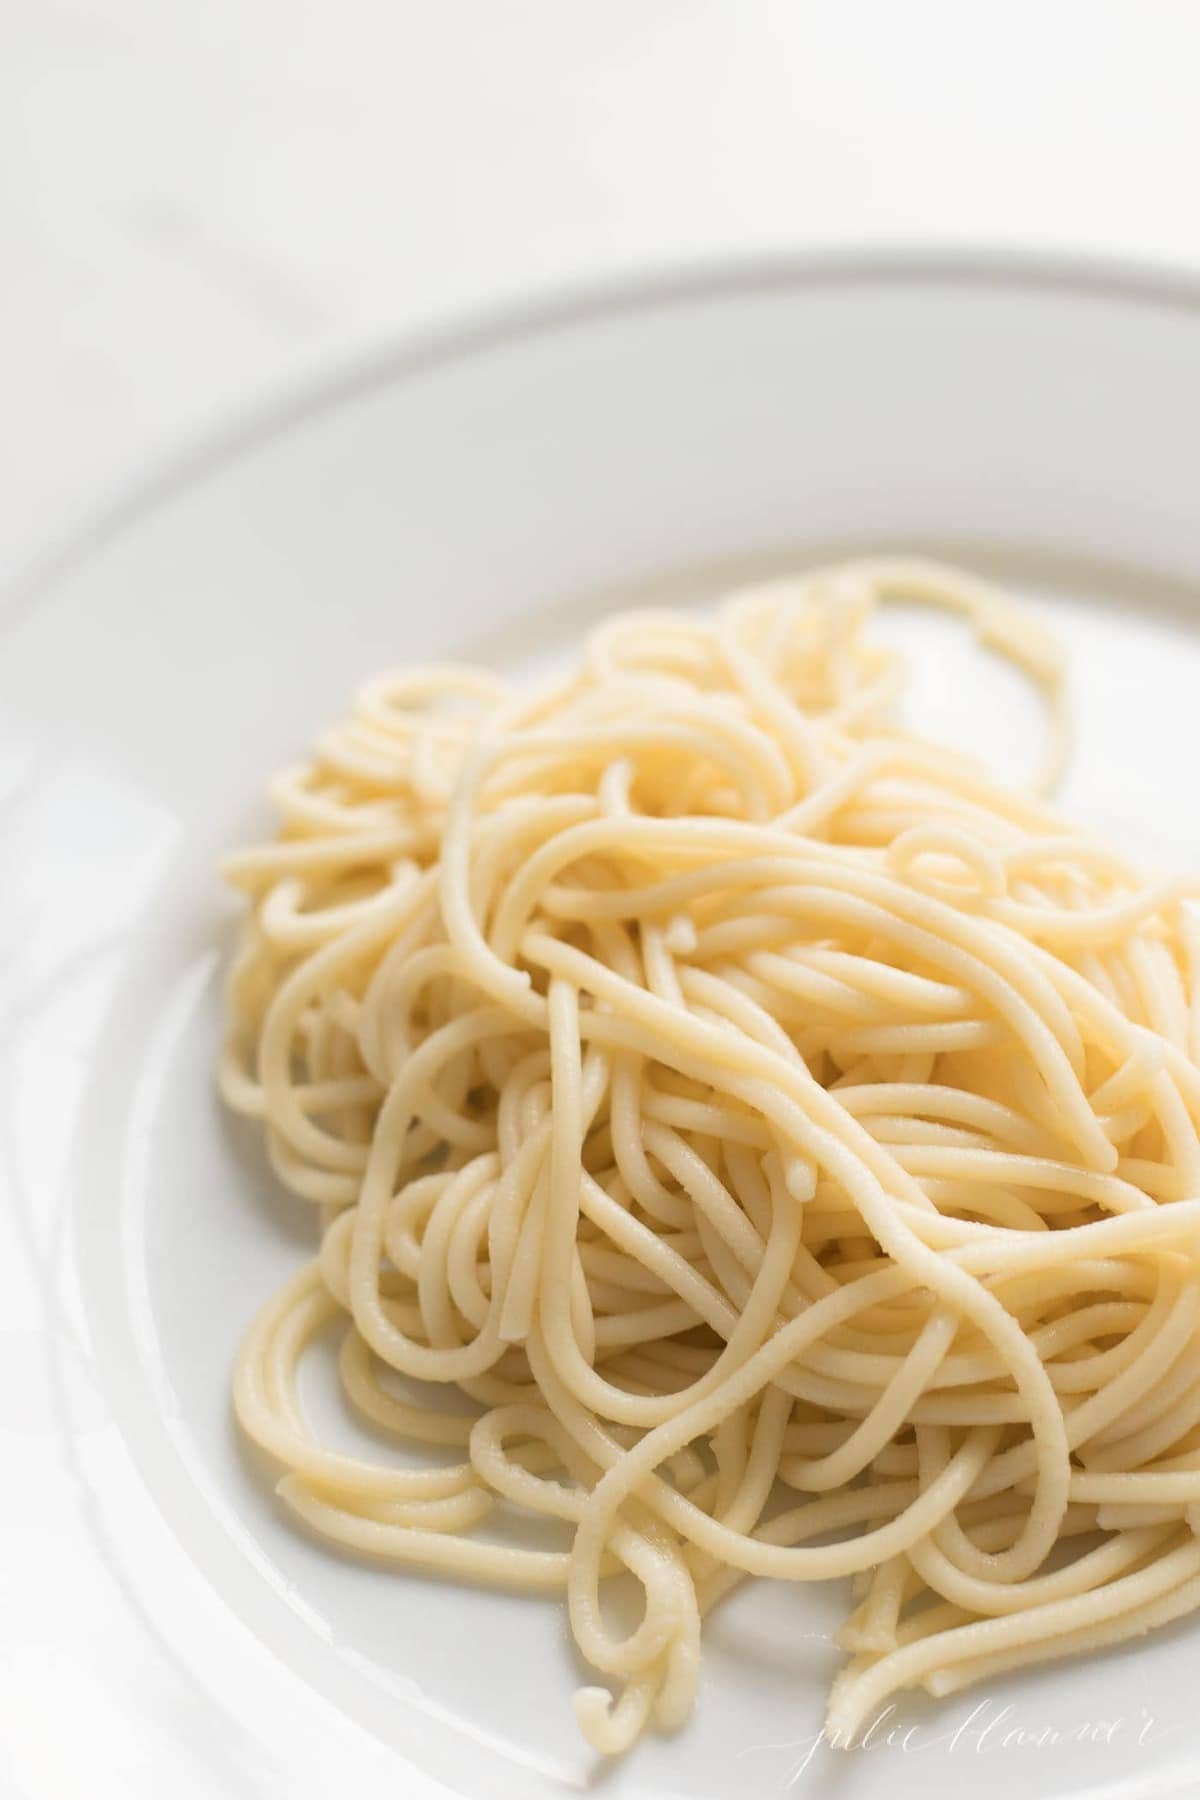 a white plate filled with a swirl of homemade egg noodles